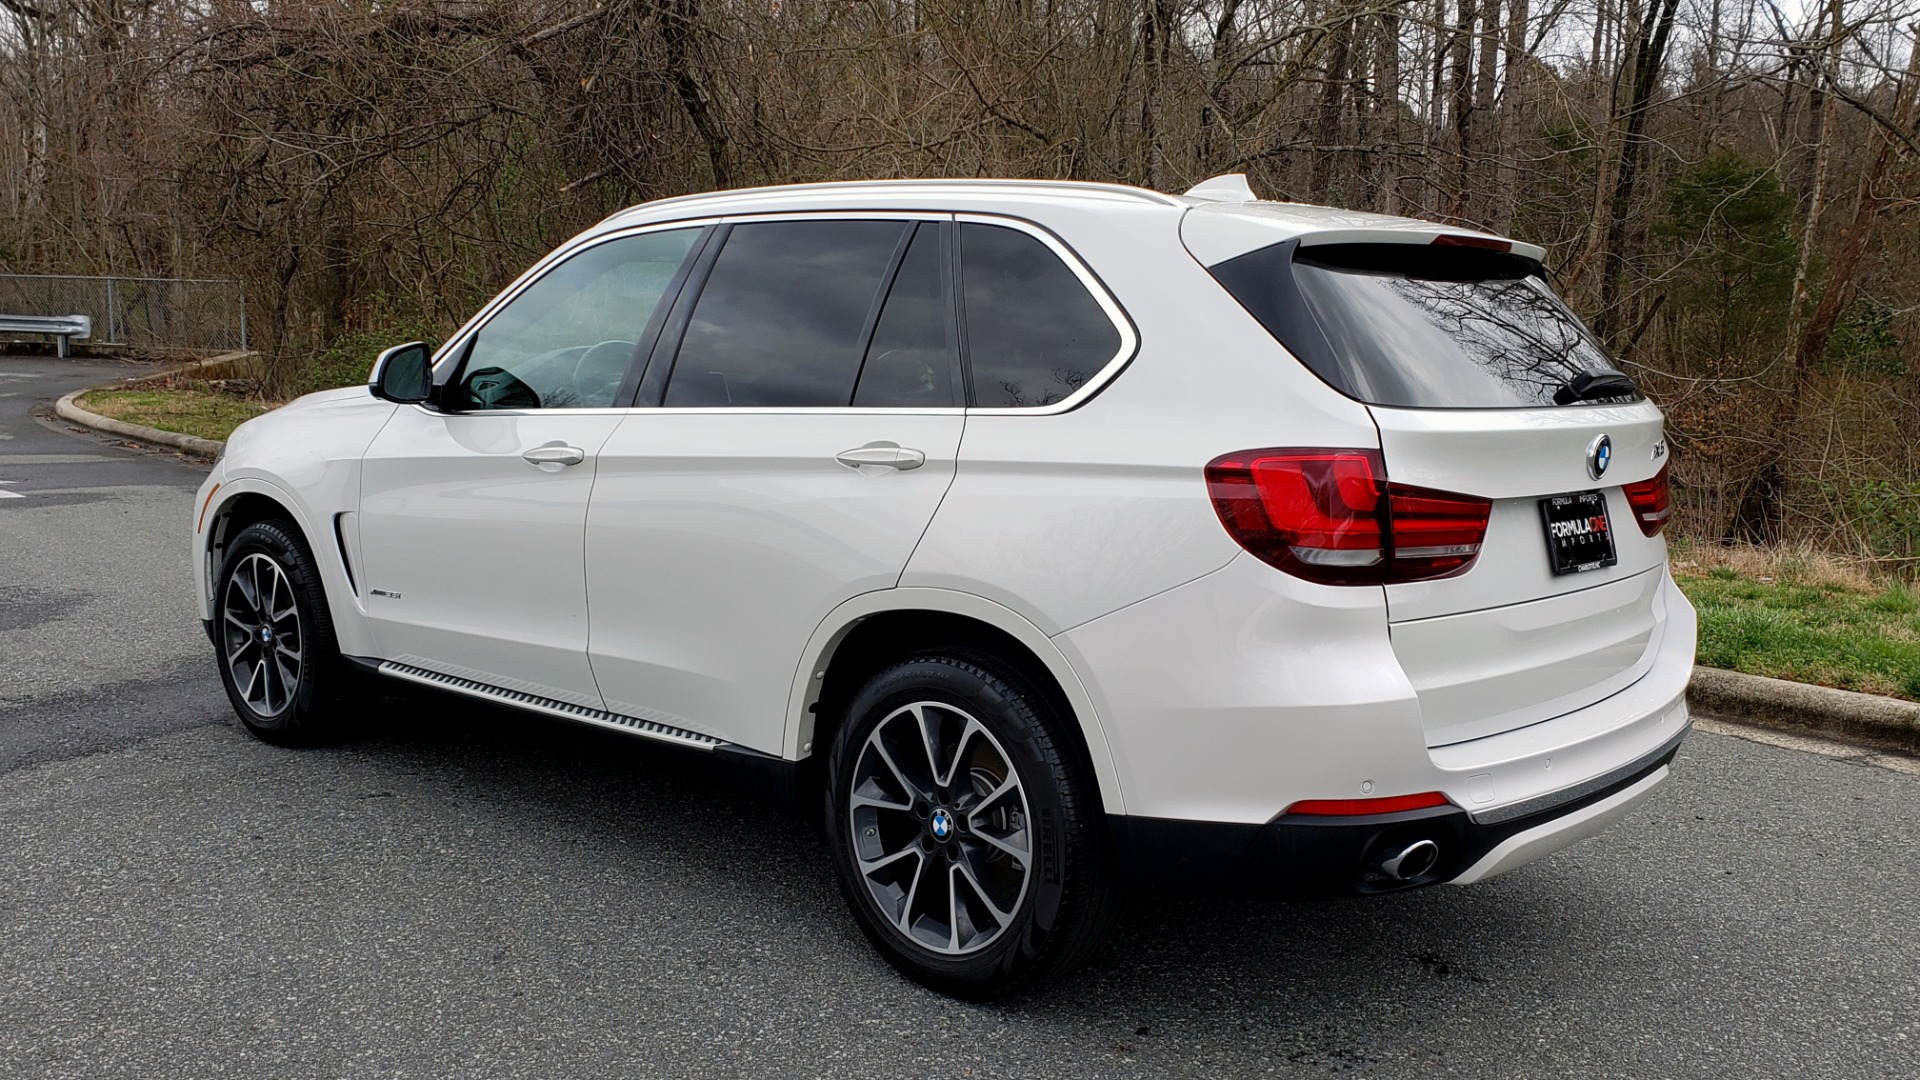 Used 2017 BMW X5 XDRIVE35I / NAV / HUD / DRVR ASST / SUNROOF / REARVIEW for sale Sold at Formula Imports in Charlotte NC 28227 3